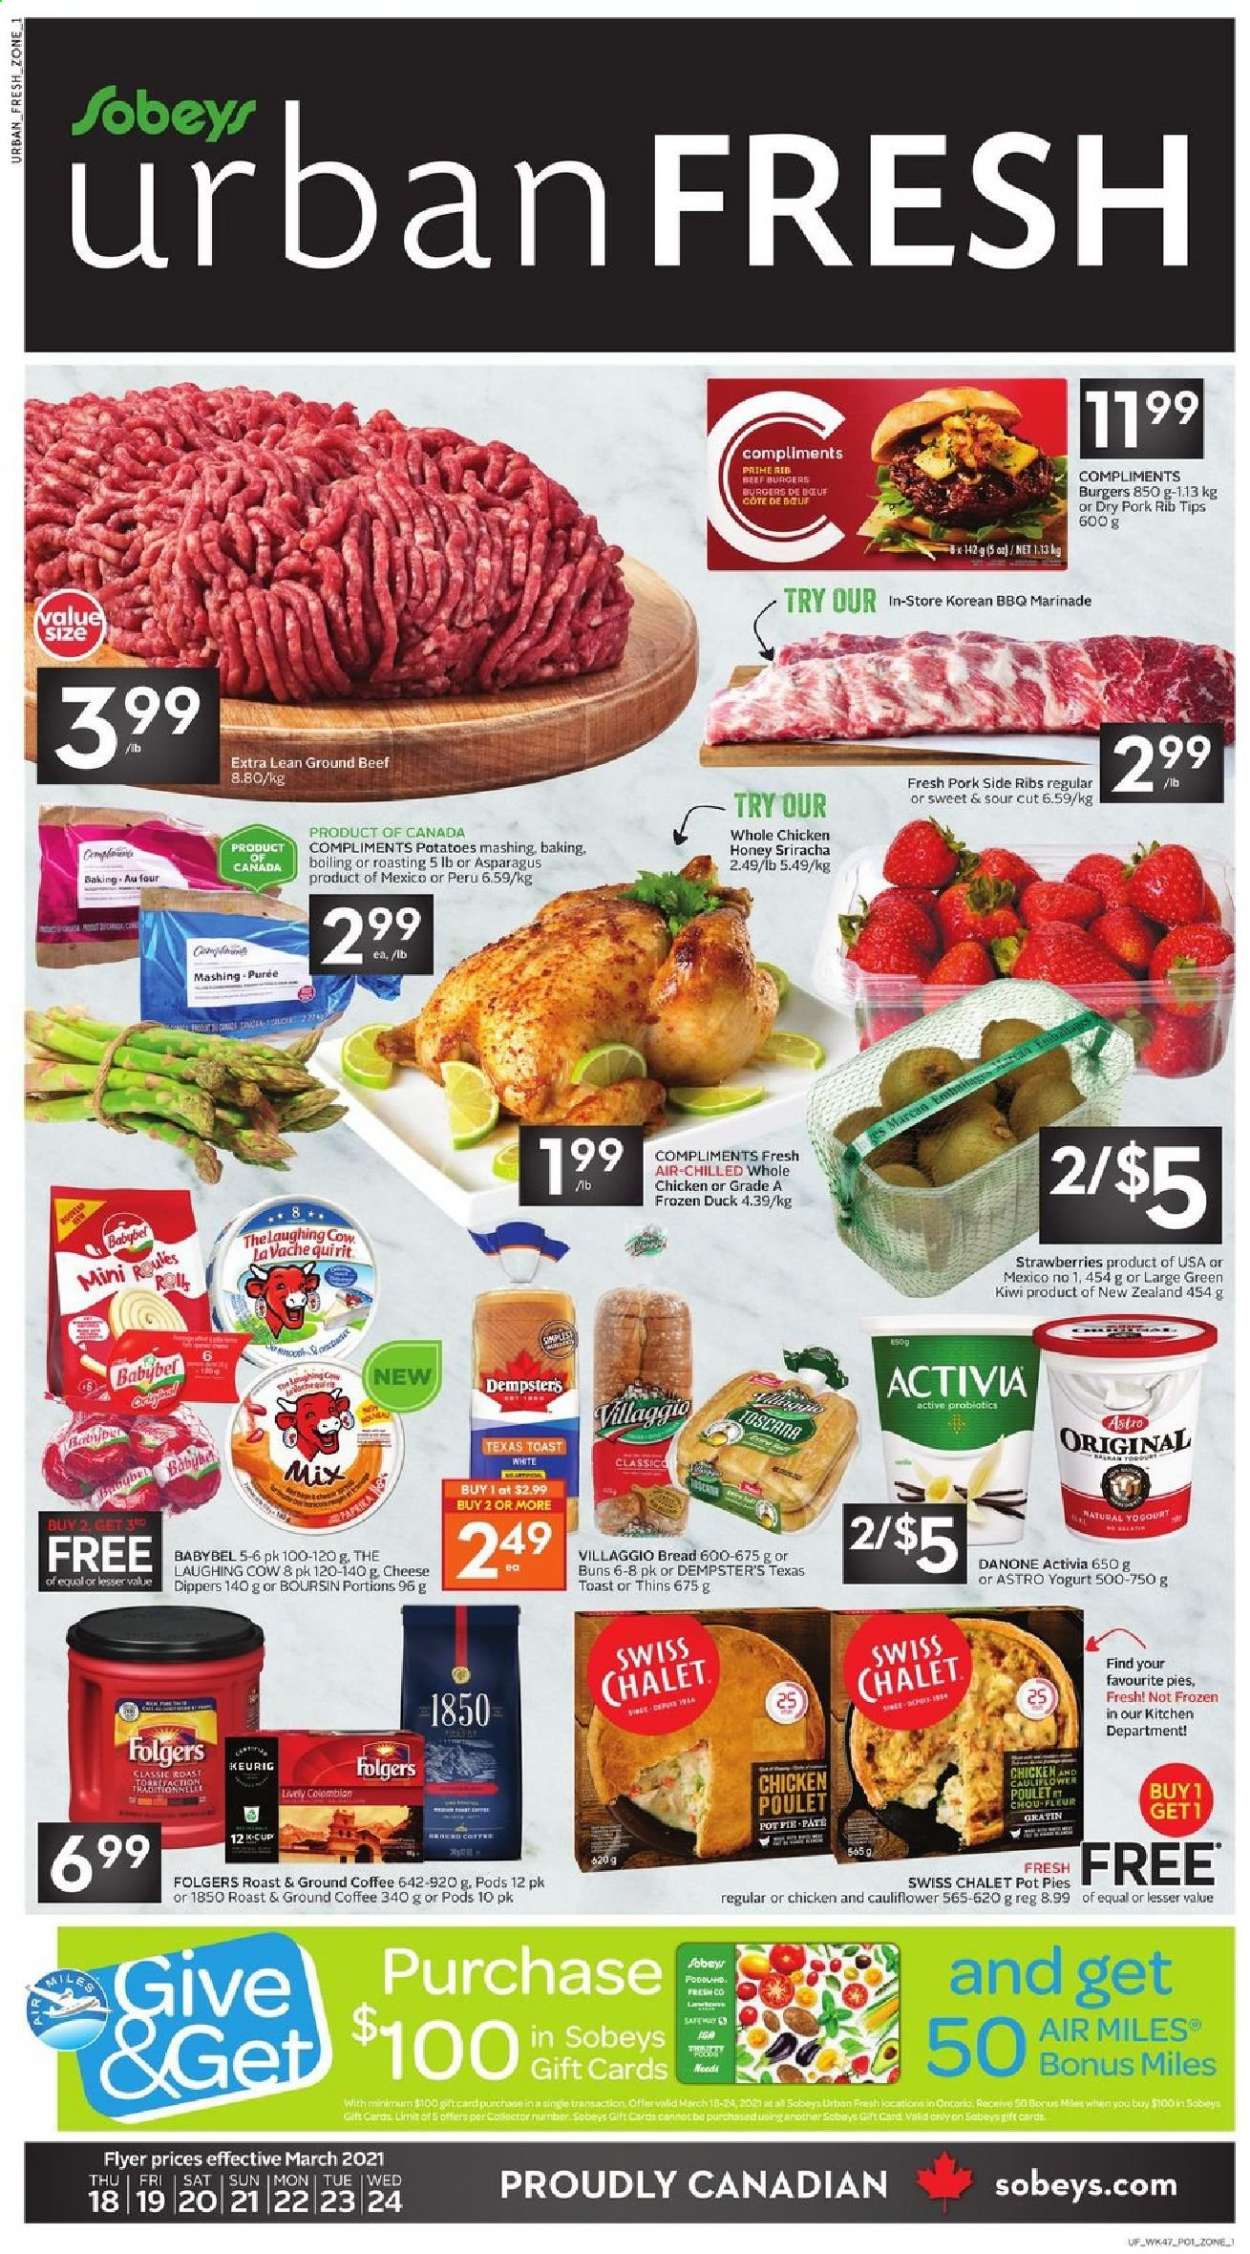 thumbnail - Sobeys Urban Fresh Flyer - March 18, 2021 - March 24, 2021 - Sales products - bread, buns, pot pie, asparagus, cauliflower, potatoes, strawberries, hamburger, cheese, The Laughing Cow, Babybel, yoghurt, Activia, Thins, sriracha, marinade, Classico, honey, coffee, Folgers, ground coffee, coffee capsules, K-Cups, Keurig, whole chicken, chicken, whole duck, beef meat, ground beef, Danone, kiwi. Page 1.